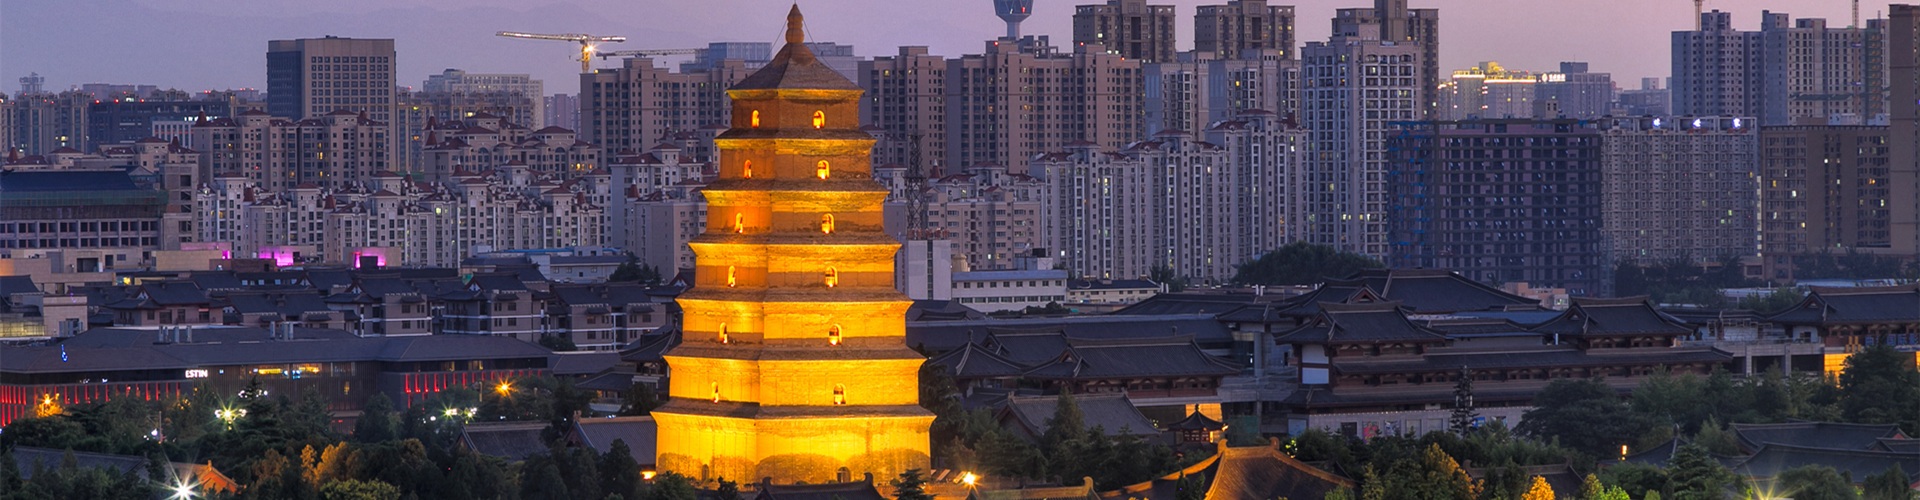 Big Wild Goose Pagoda - the Largest and Earliest Tang-Style Tower